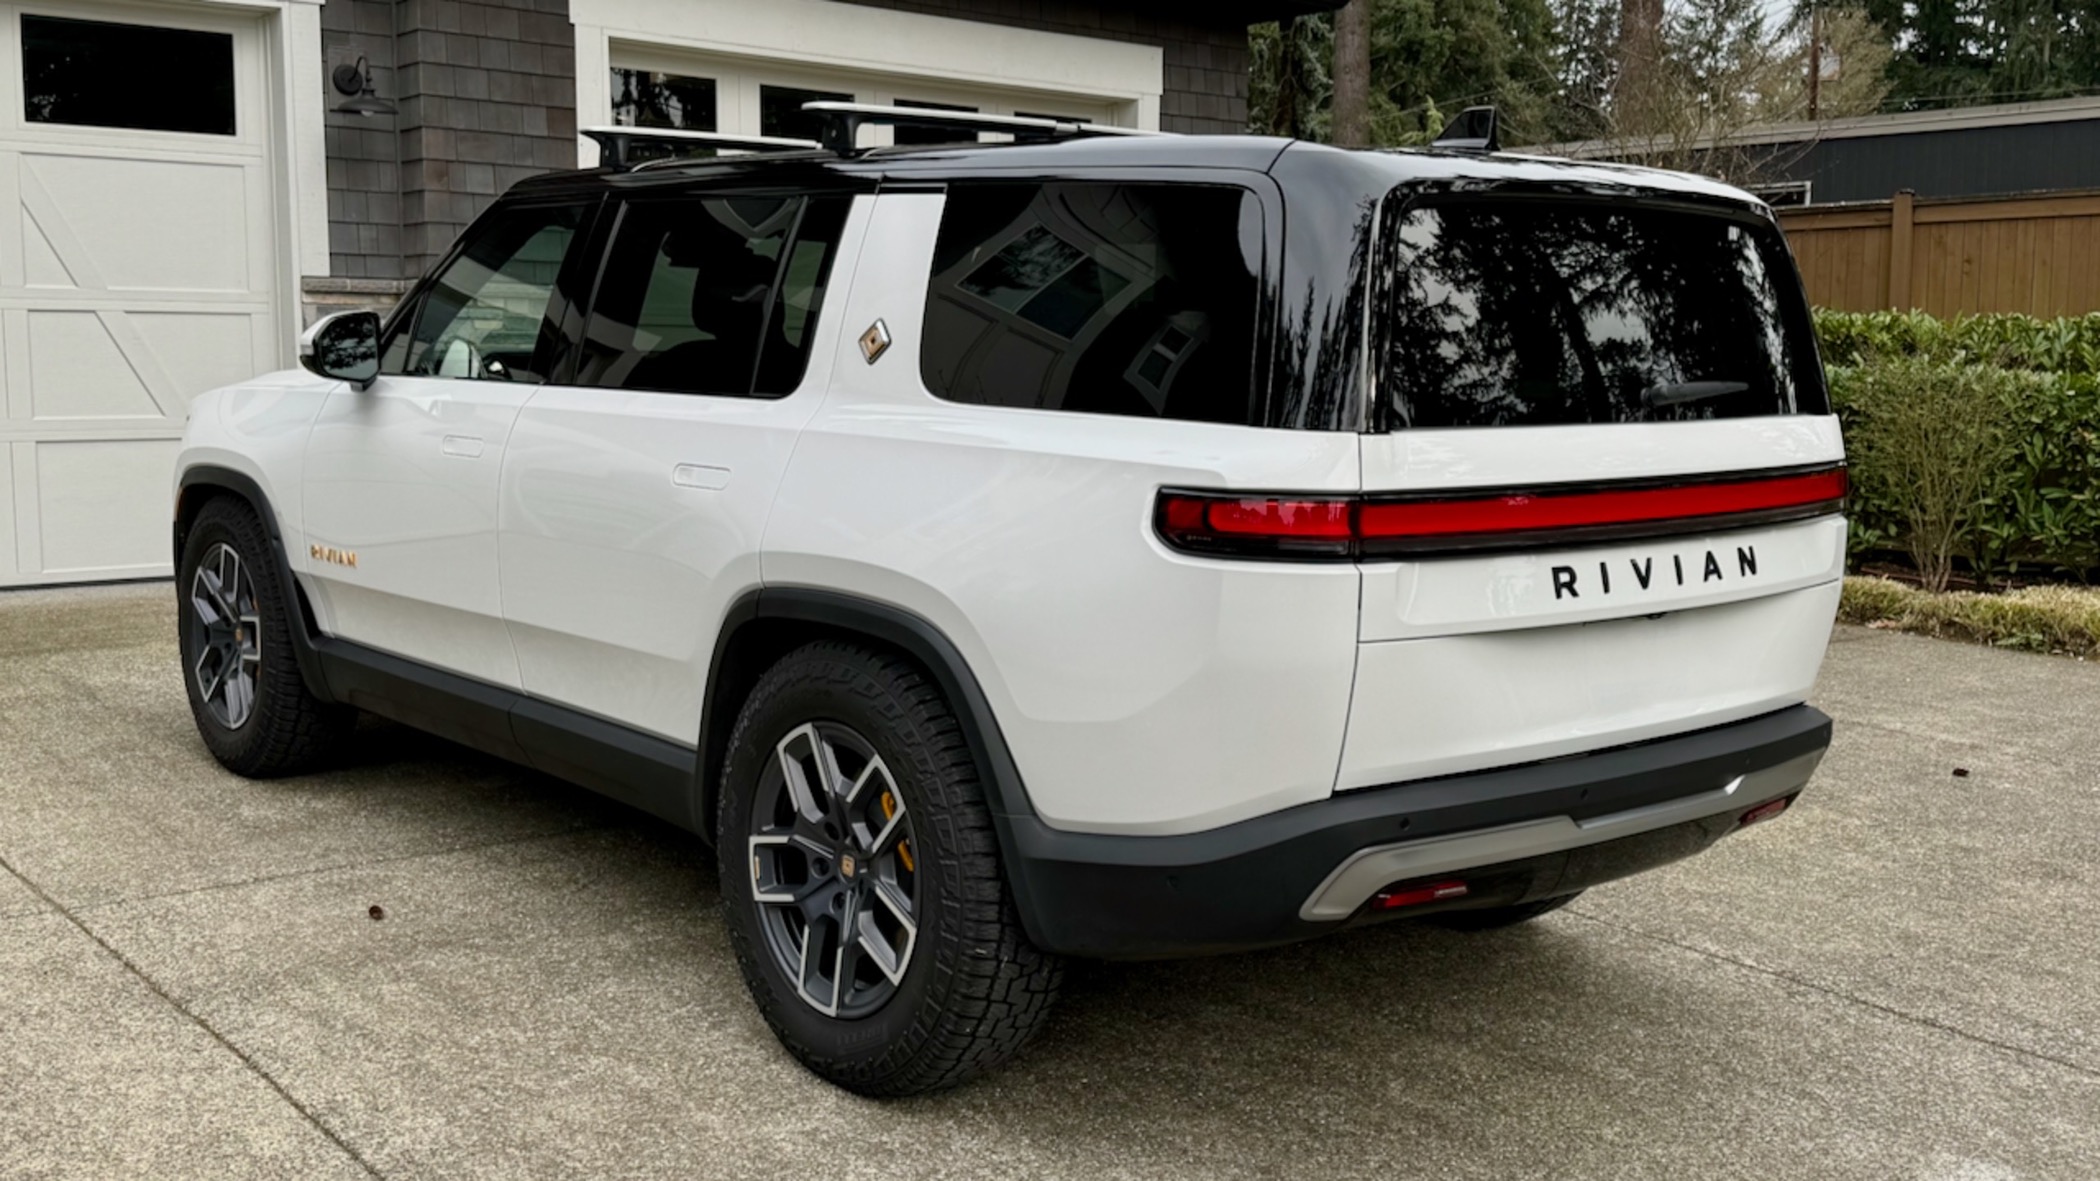 Rivian R1T R1S PPF, blackout and de-badge (white R1S) IMG_8826@2x